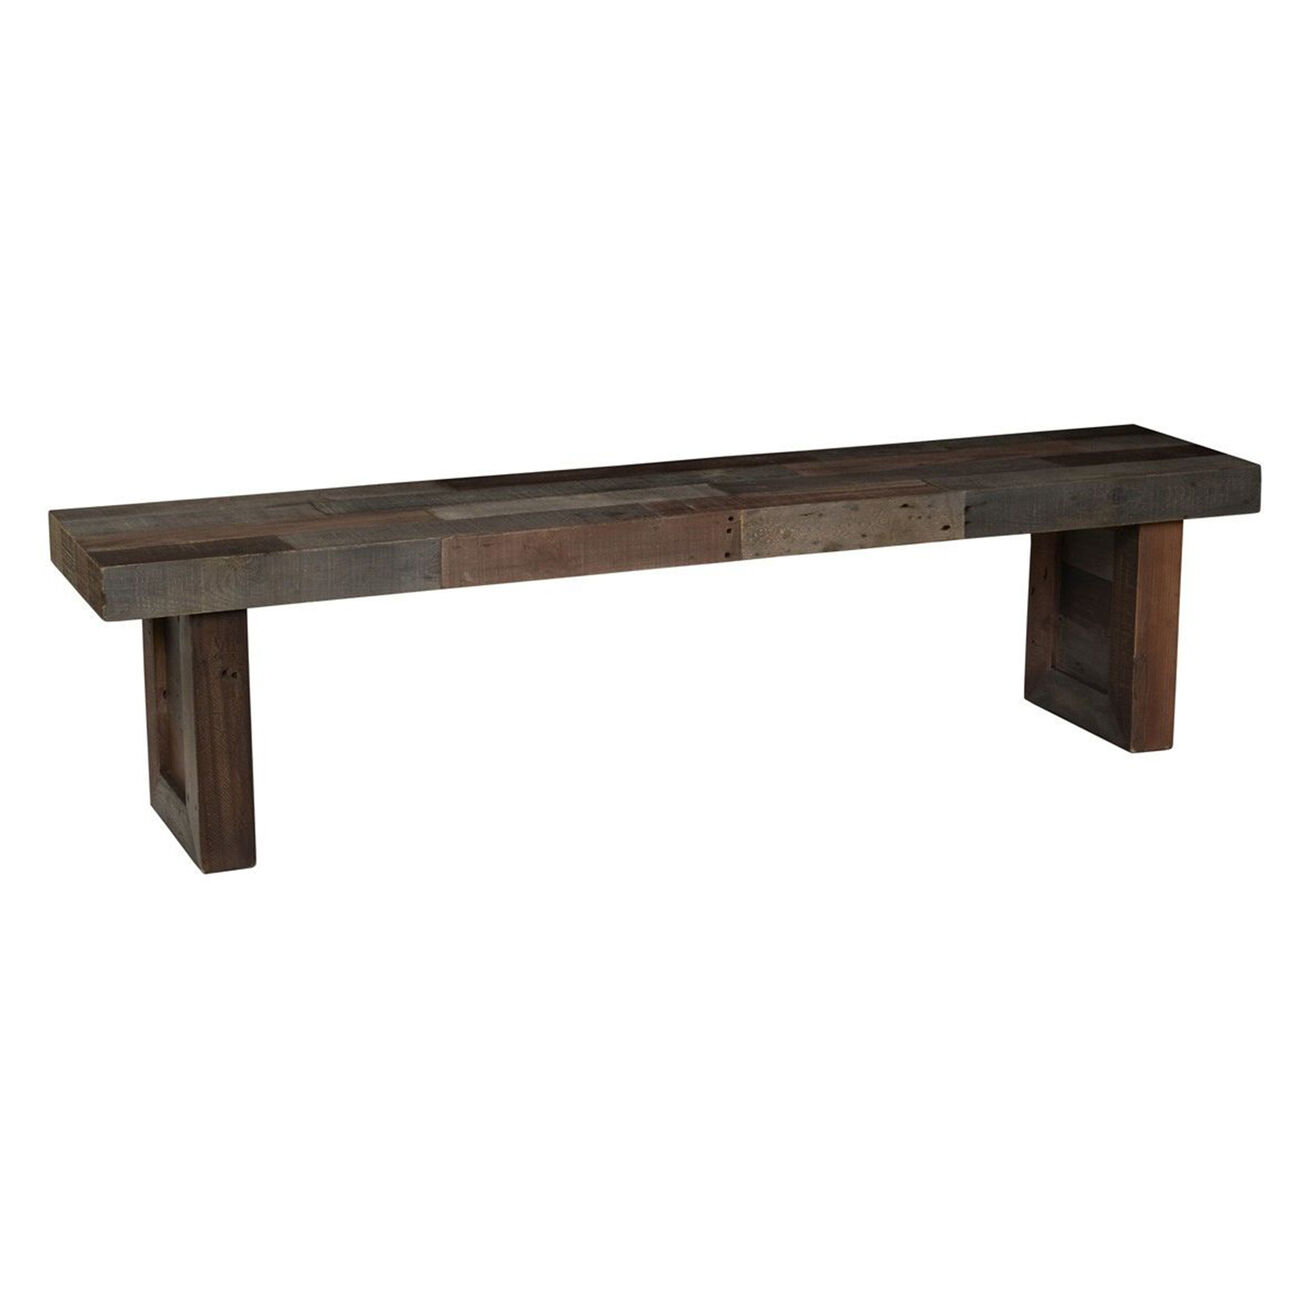 Rectangular Reclaimed Wood Bench with Sled Base, Distressed Gray